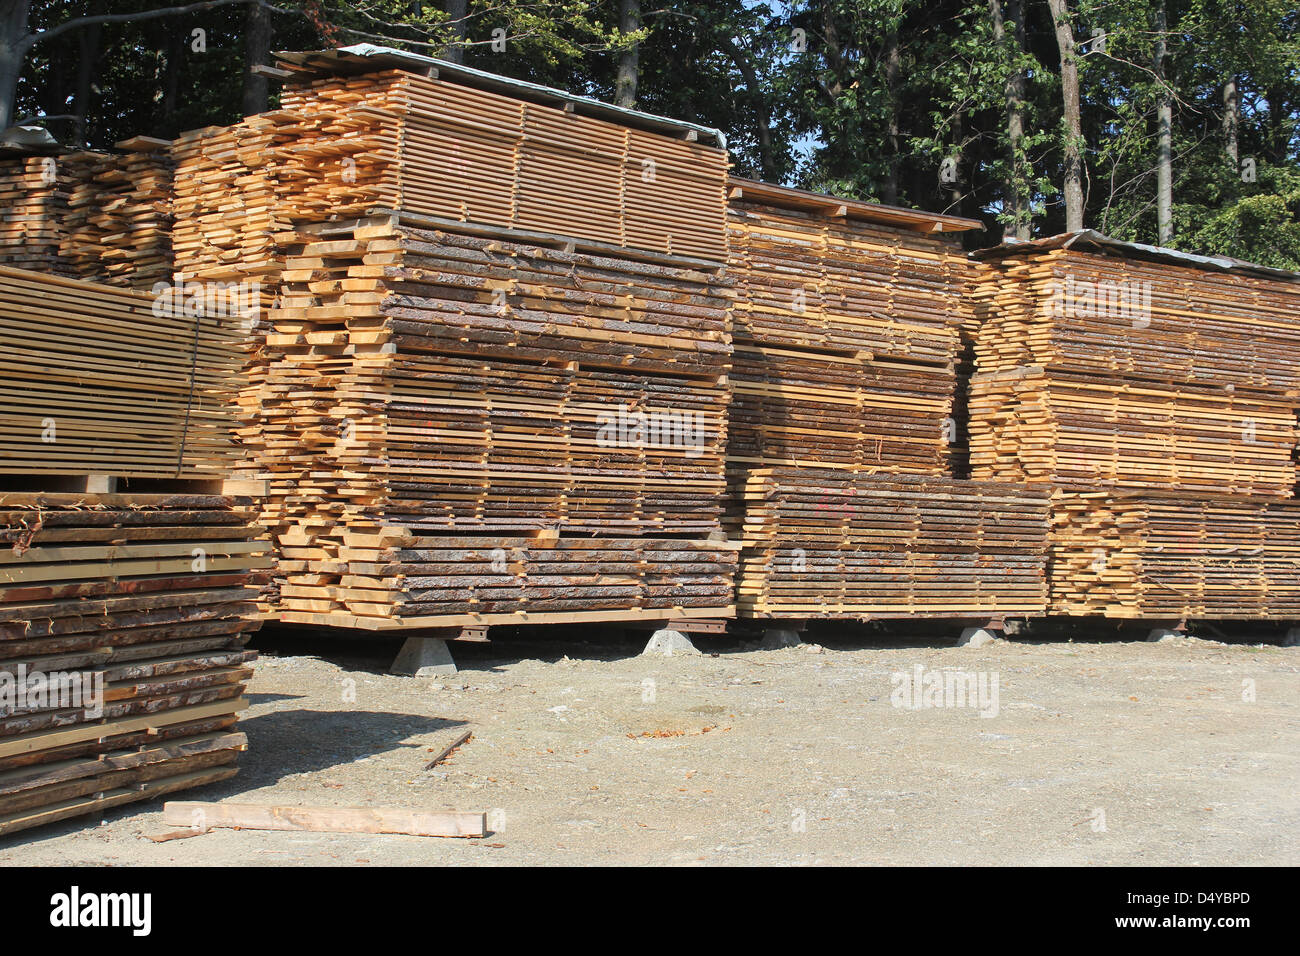 Orderly stacks of drying timber planks - wood industry Stock Photo